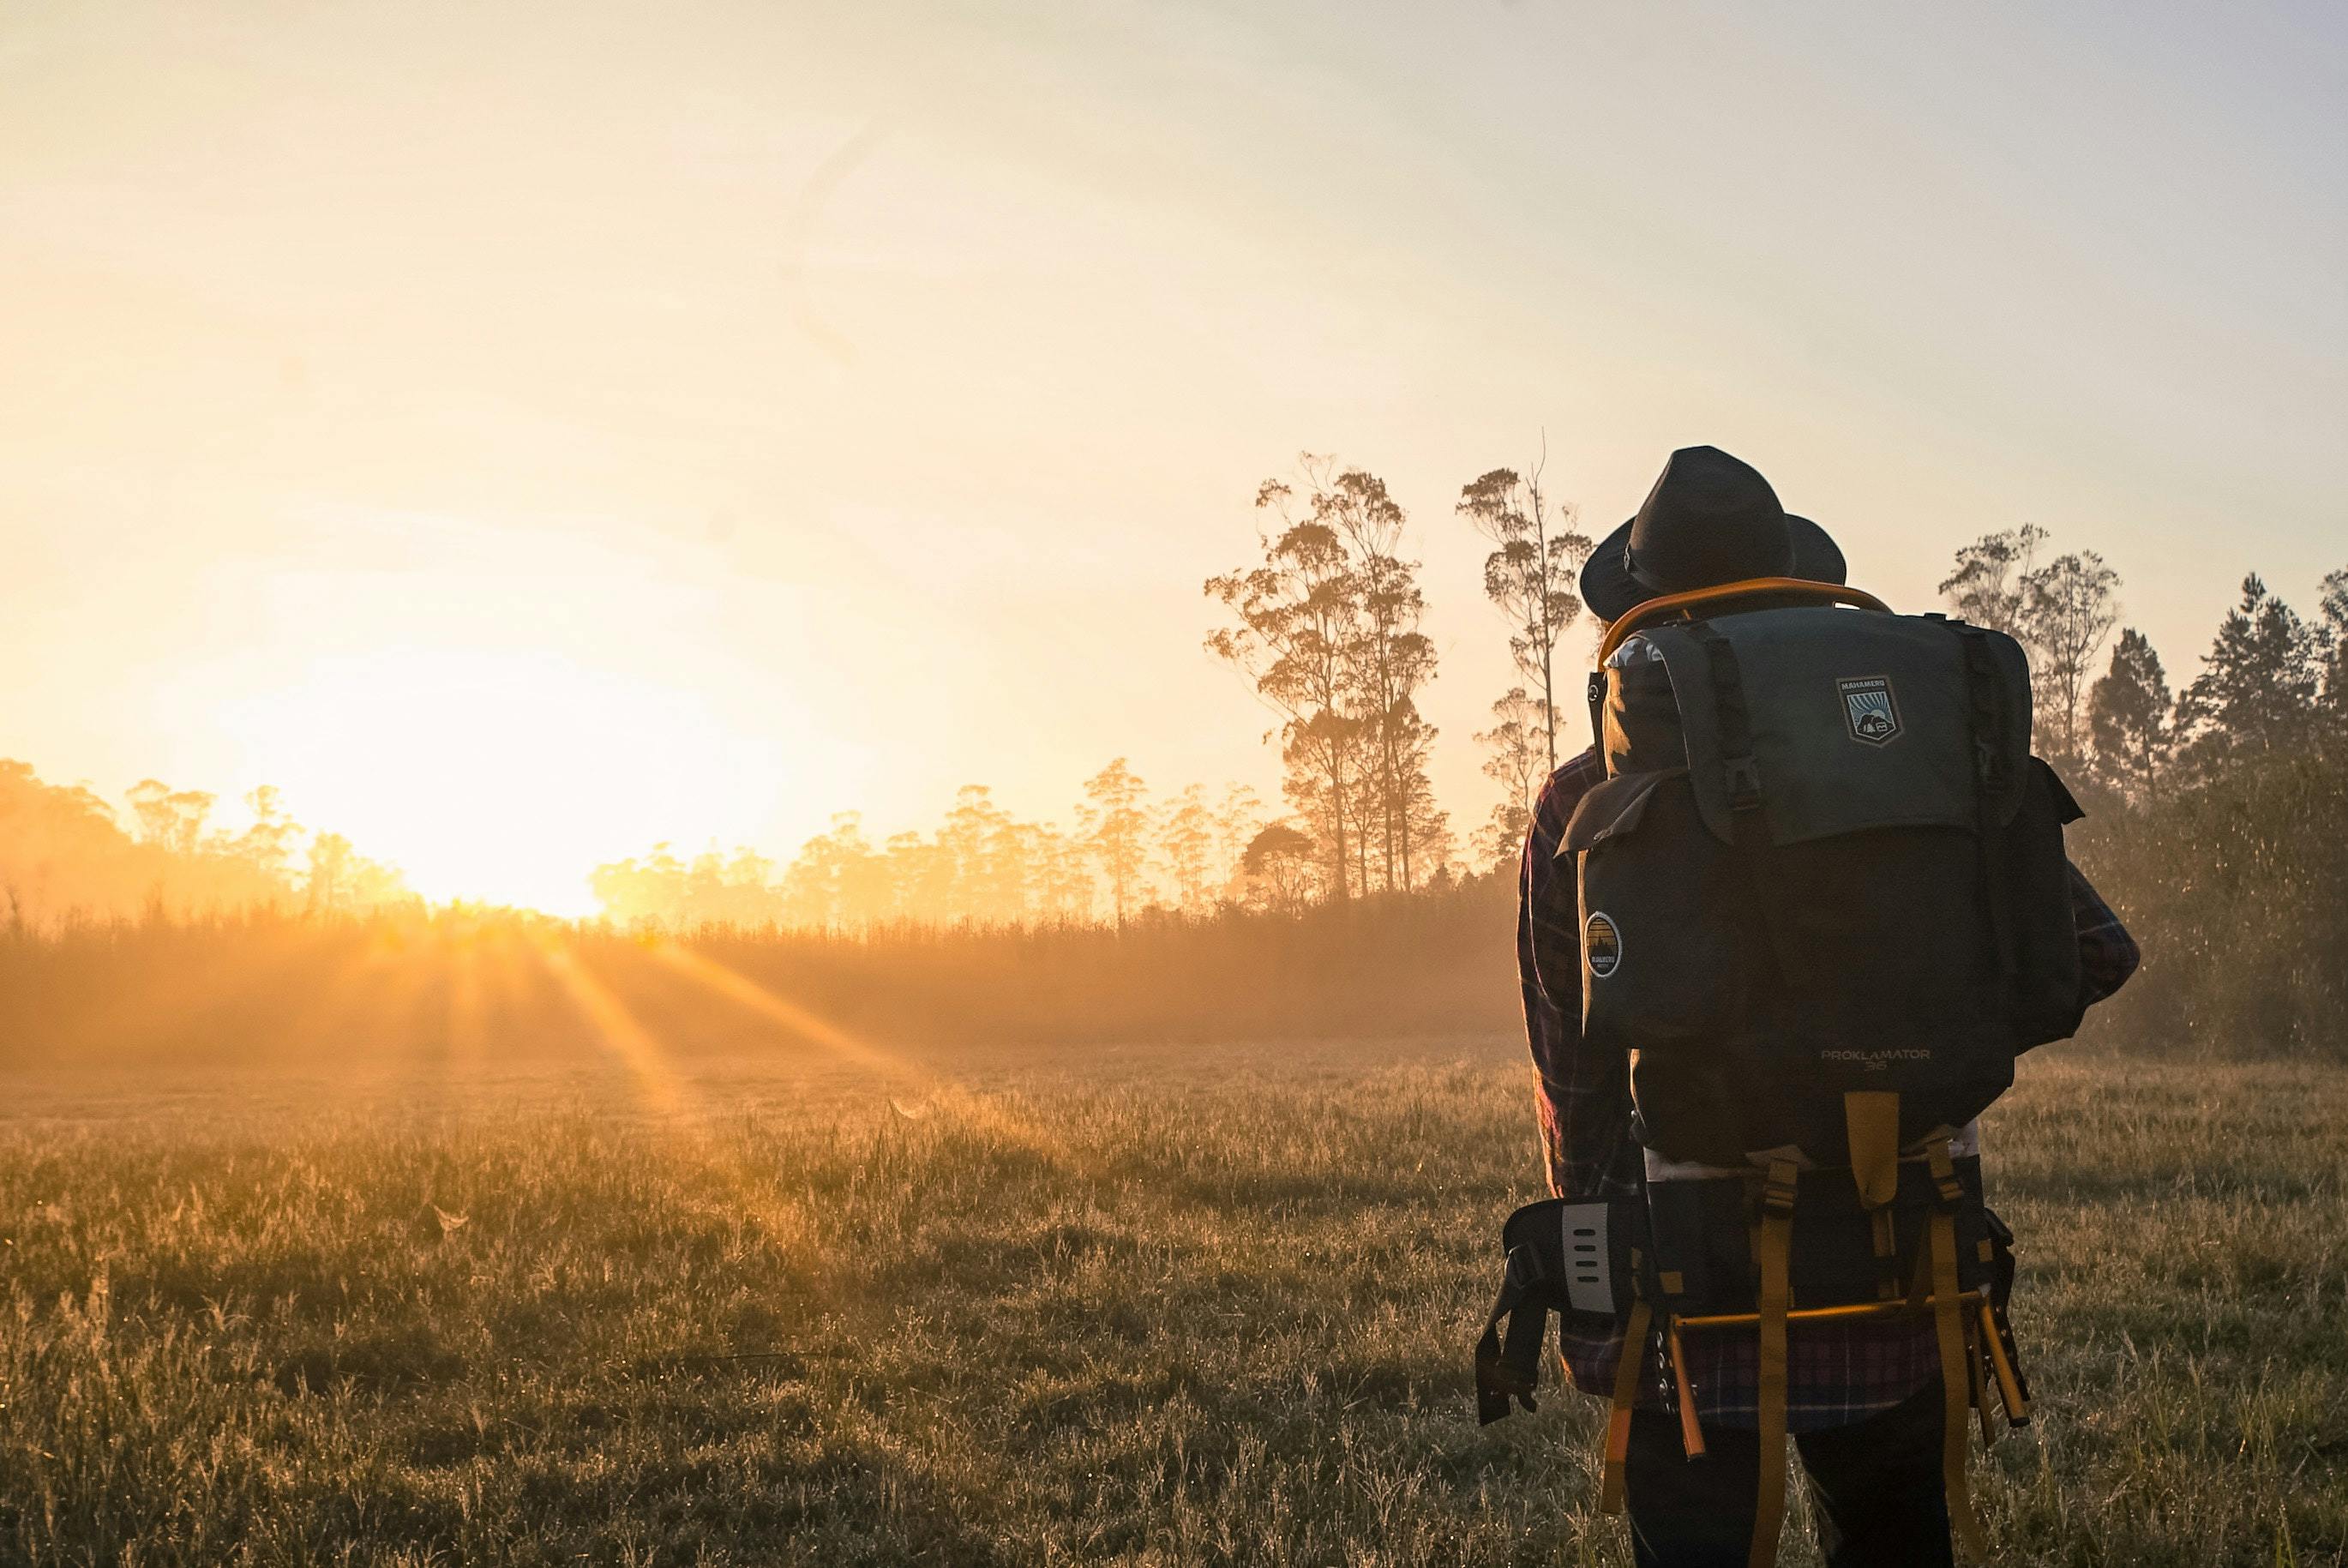 A person in an external-frame backpack looks out at a sunrise